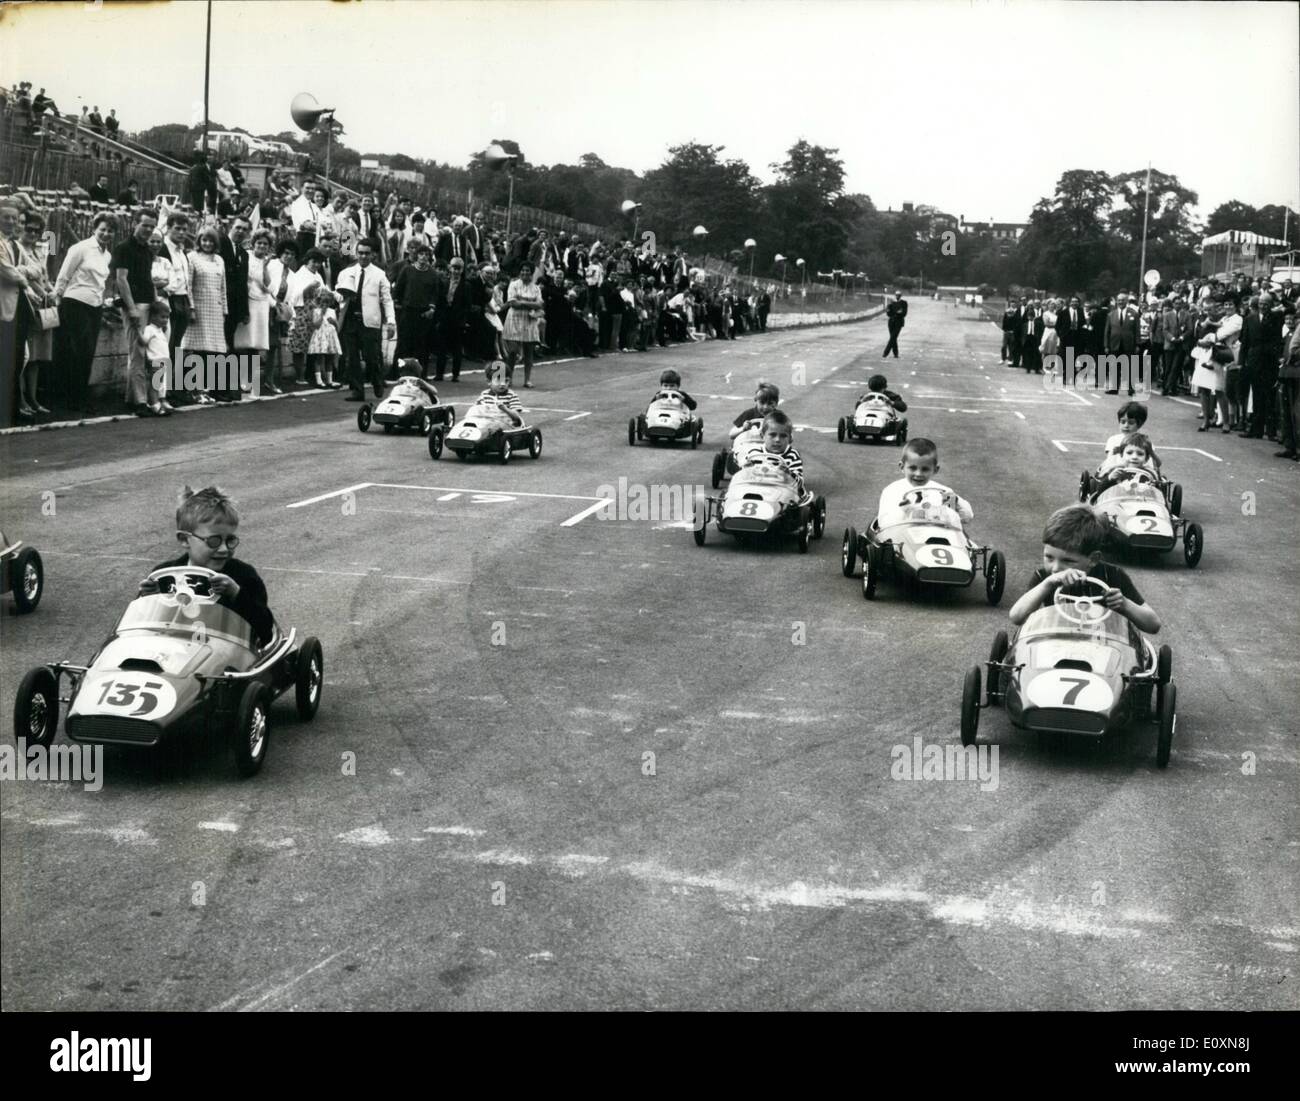 Jun. 06, 1967 - Four and a half year old champion: Photo shows Four and a half year old Andrew Coombe, on left, seen winning the pedal car Junior Grand Prix, at the Crystal Palace motor racing circuit yesterday. Andrew comes form Sydenham, S.E. Stock Photo